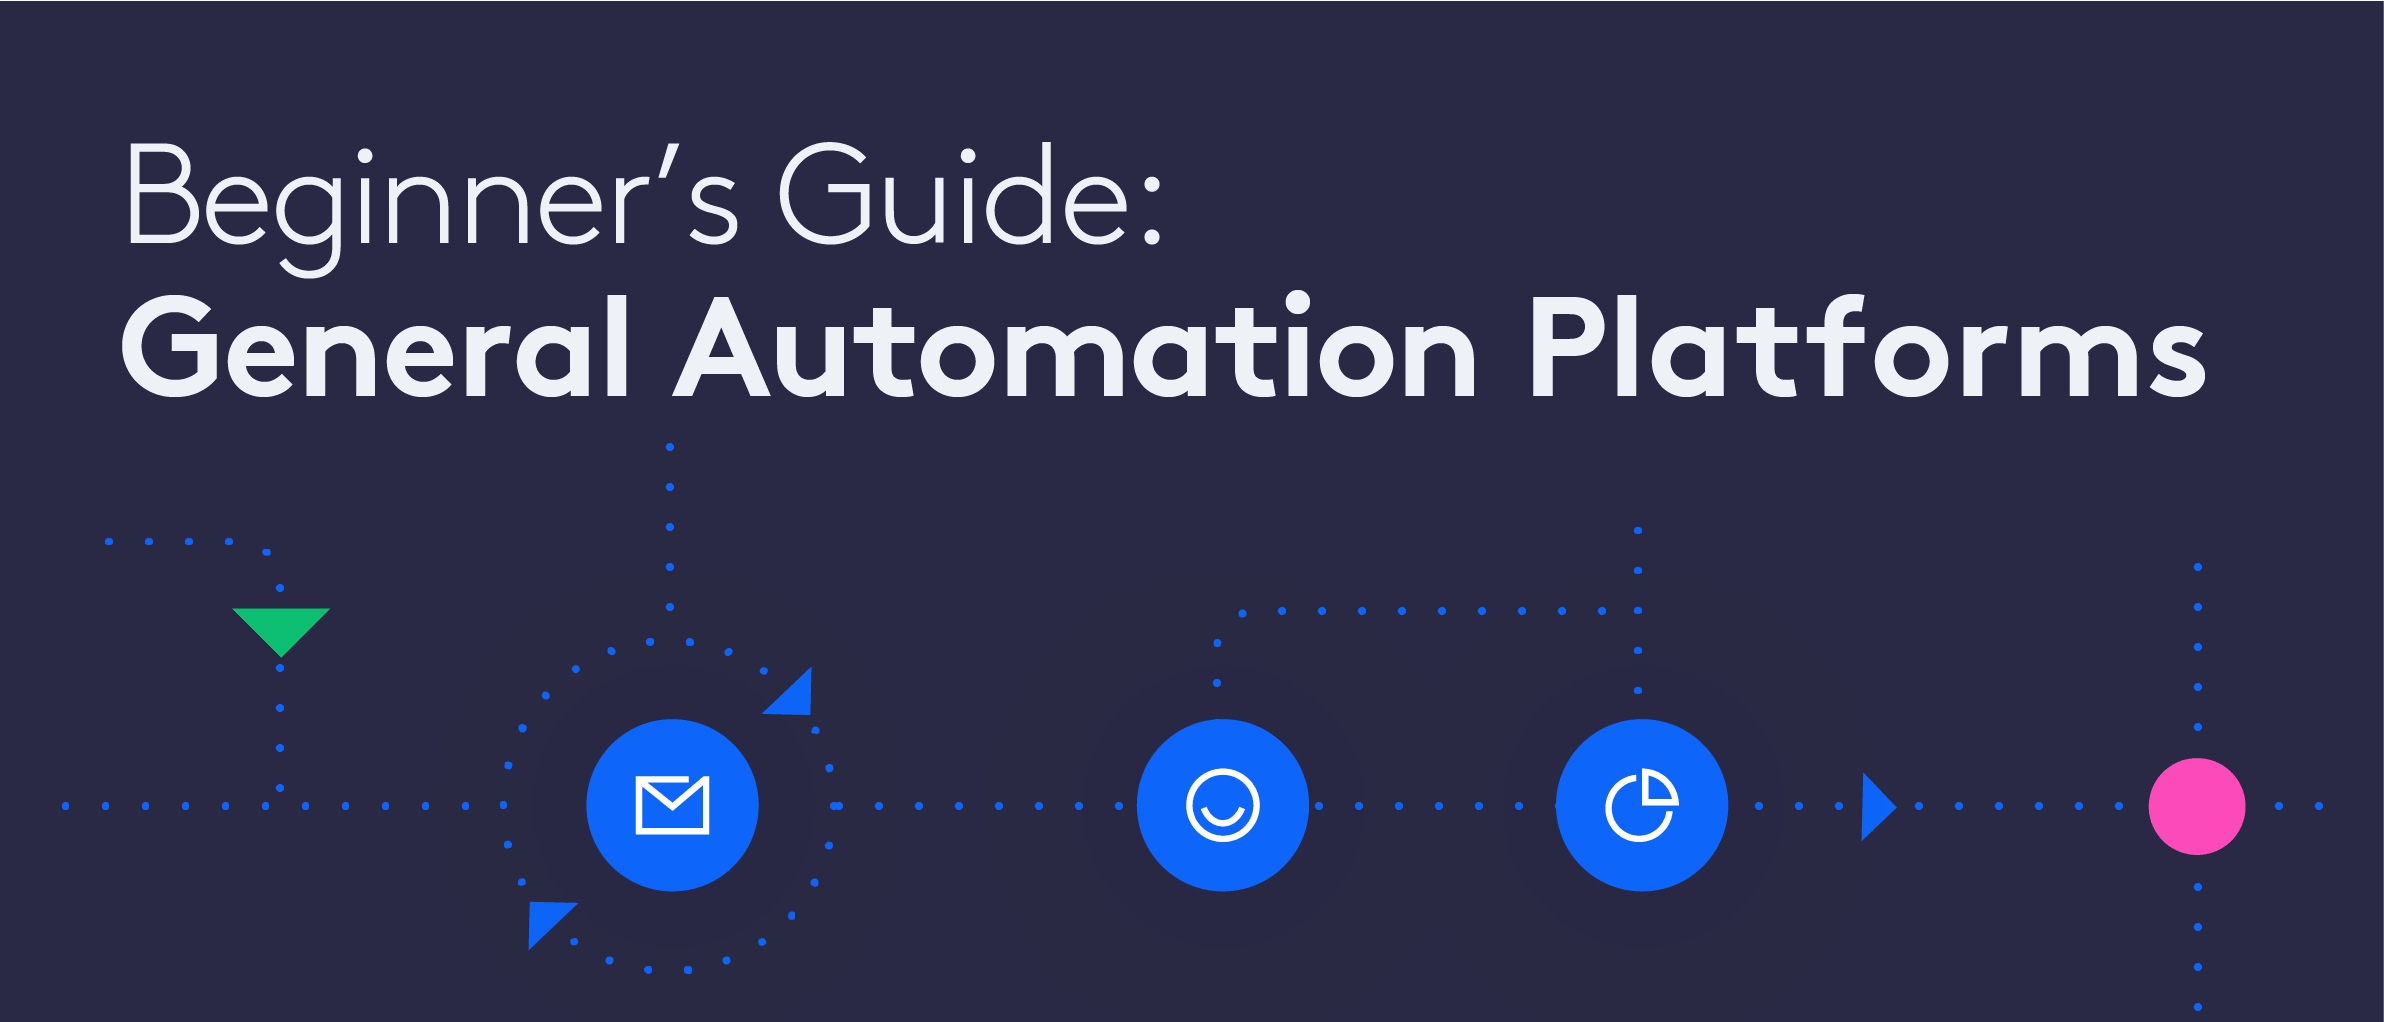 Beginner's guide to general automation platforms by Tray.io